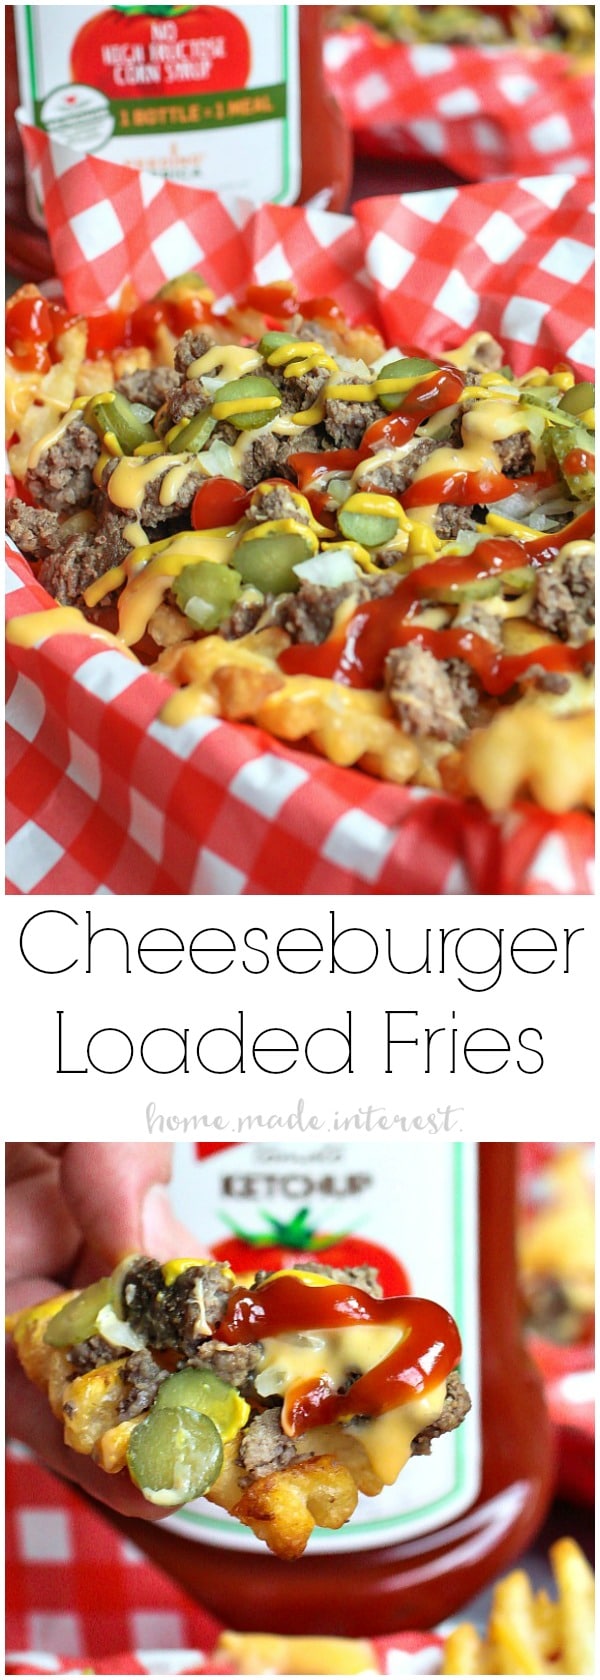 Loaded Cheeseburger Fries | These french fries are loaded with everything it takes to make a great cheeseburger. Ground beef, onions, pickles, cheese, and of course ketchup and mustard. Loaded Cheeseburger Fries are an awesome appetizer recipe for your next football party or a weeknight meal for the family. This loaded french fry recipe is going to blow your mind!